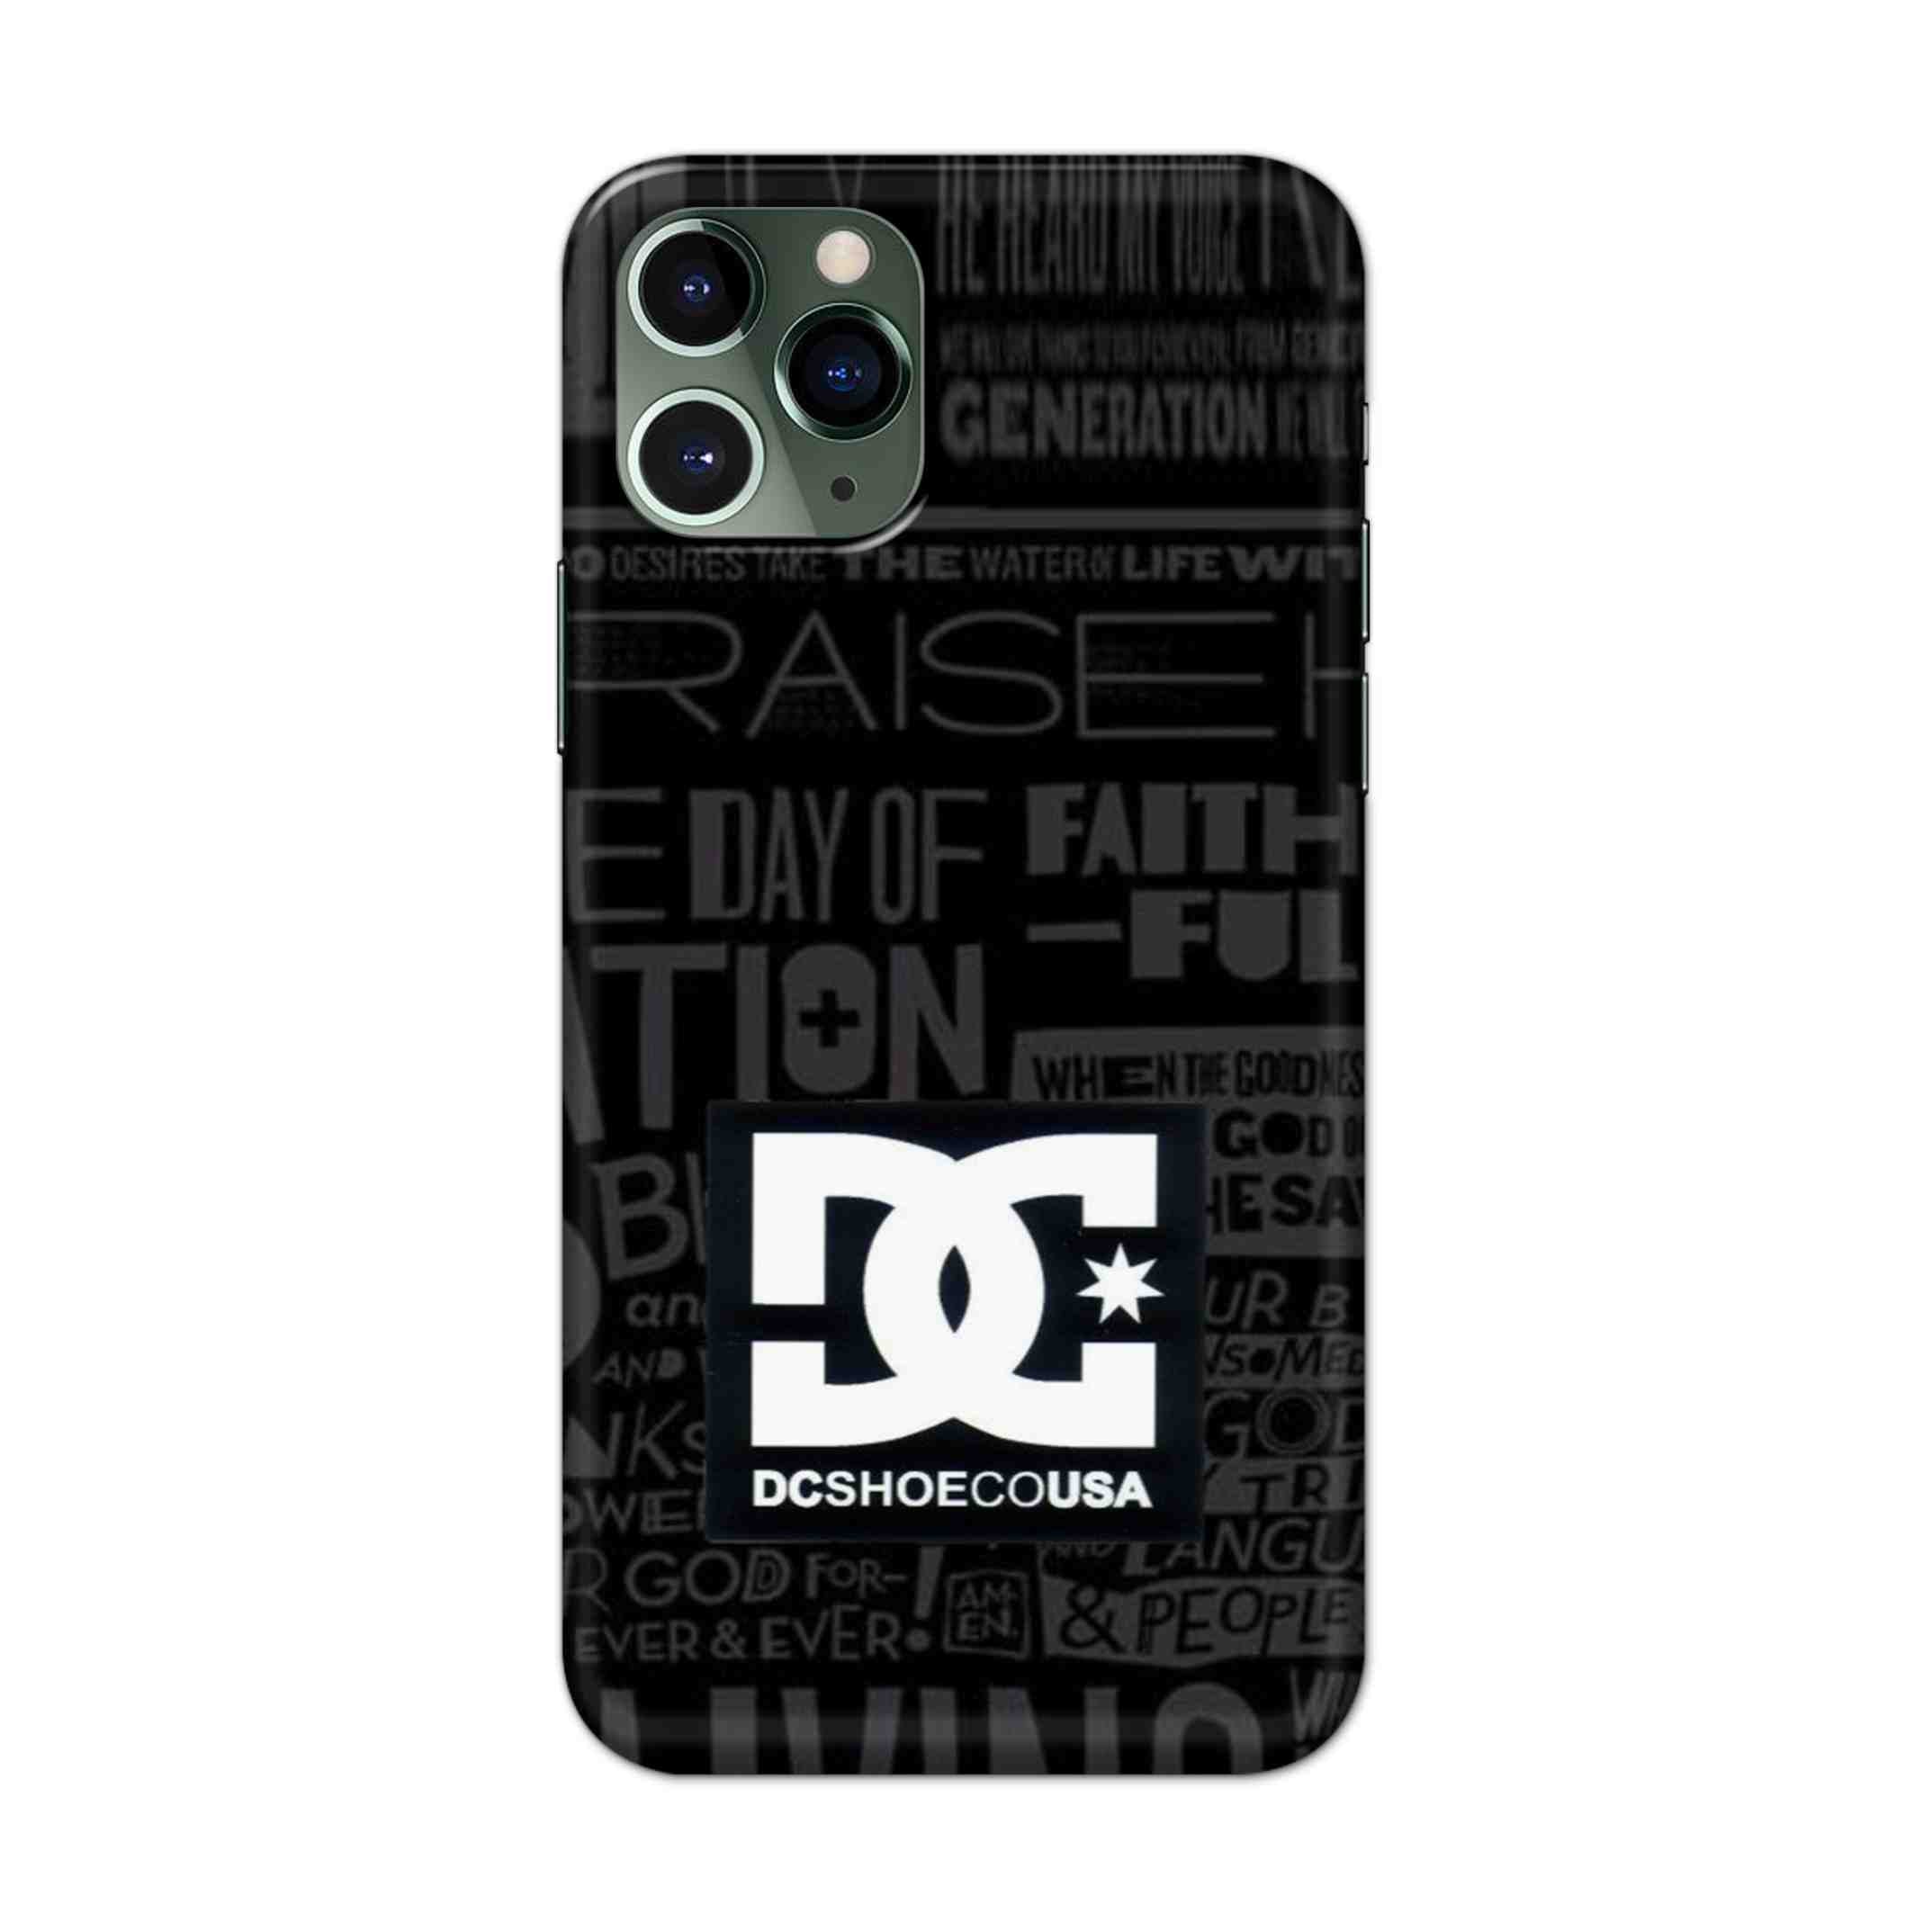 Buy Dc Shoecousa Hard Back Mobile Phone Case/Cover For iPhone 11 Pro Max Online